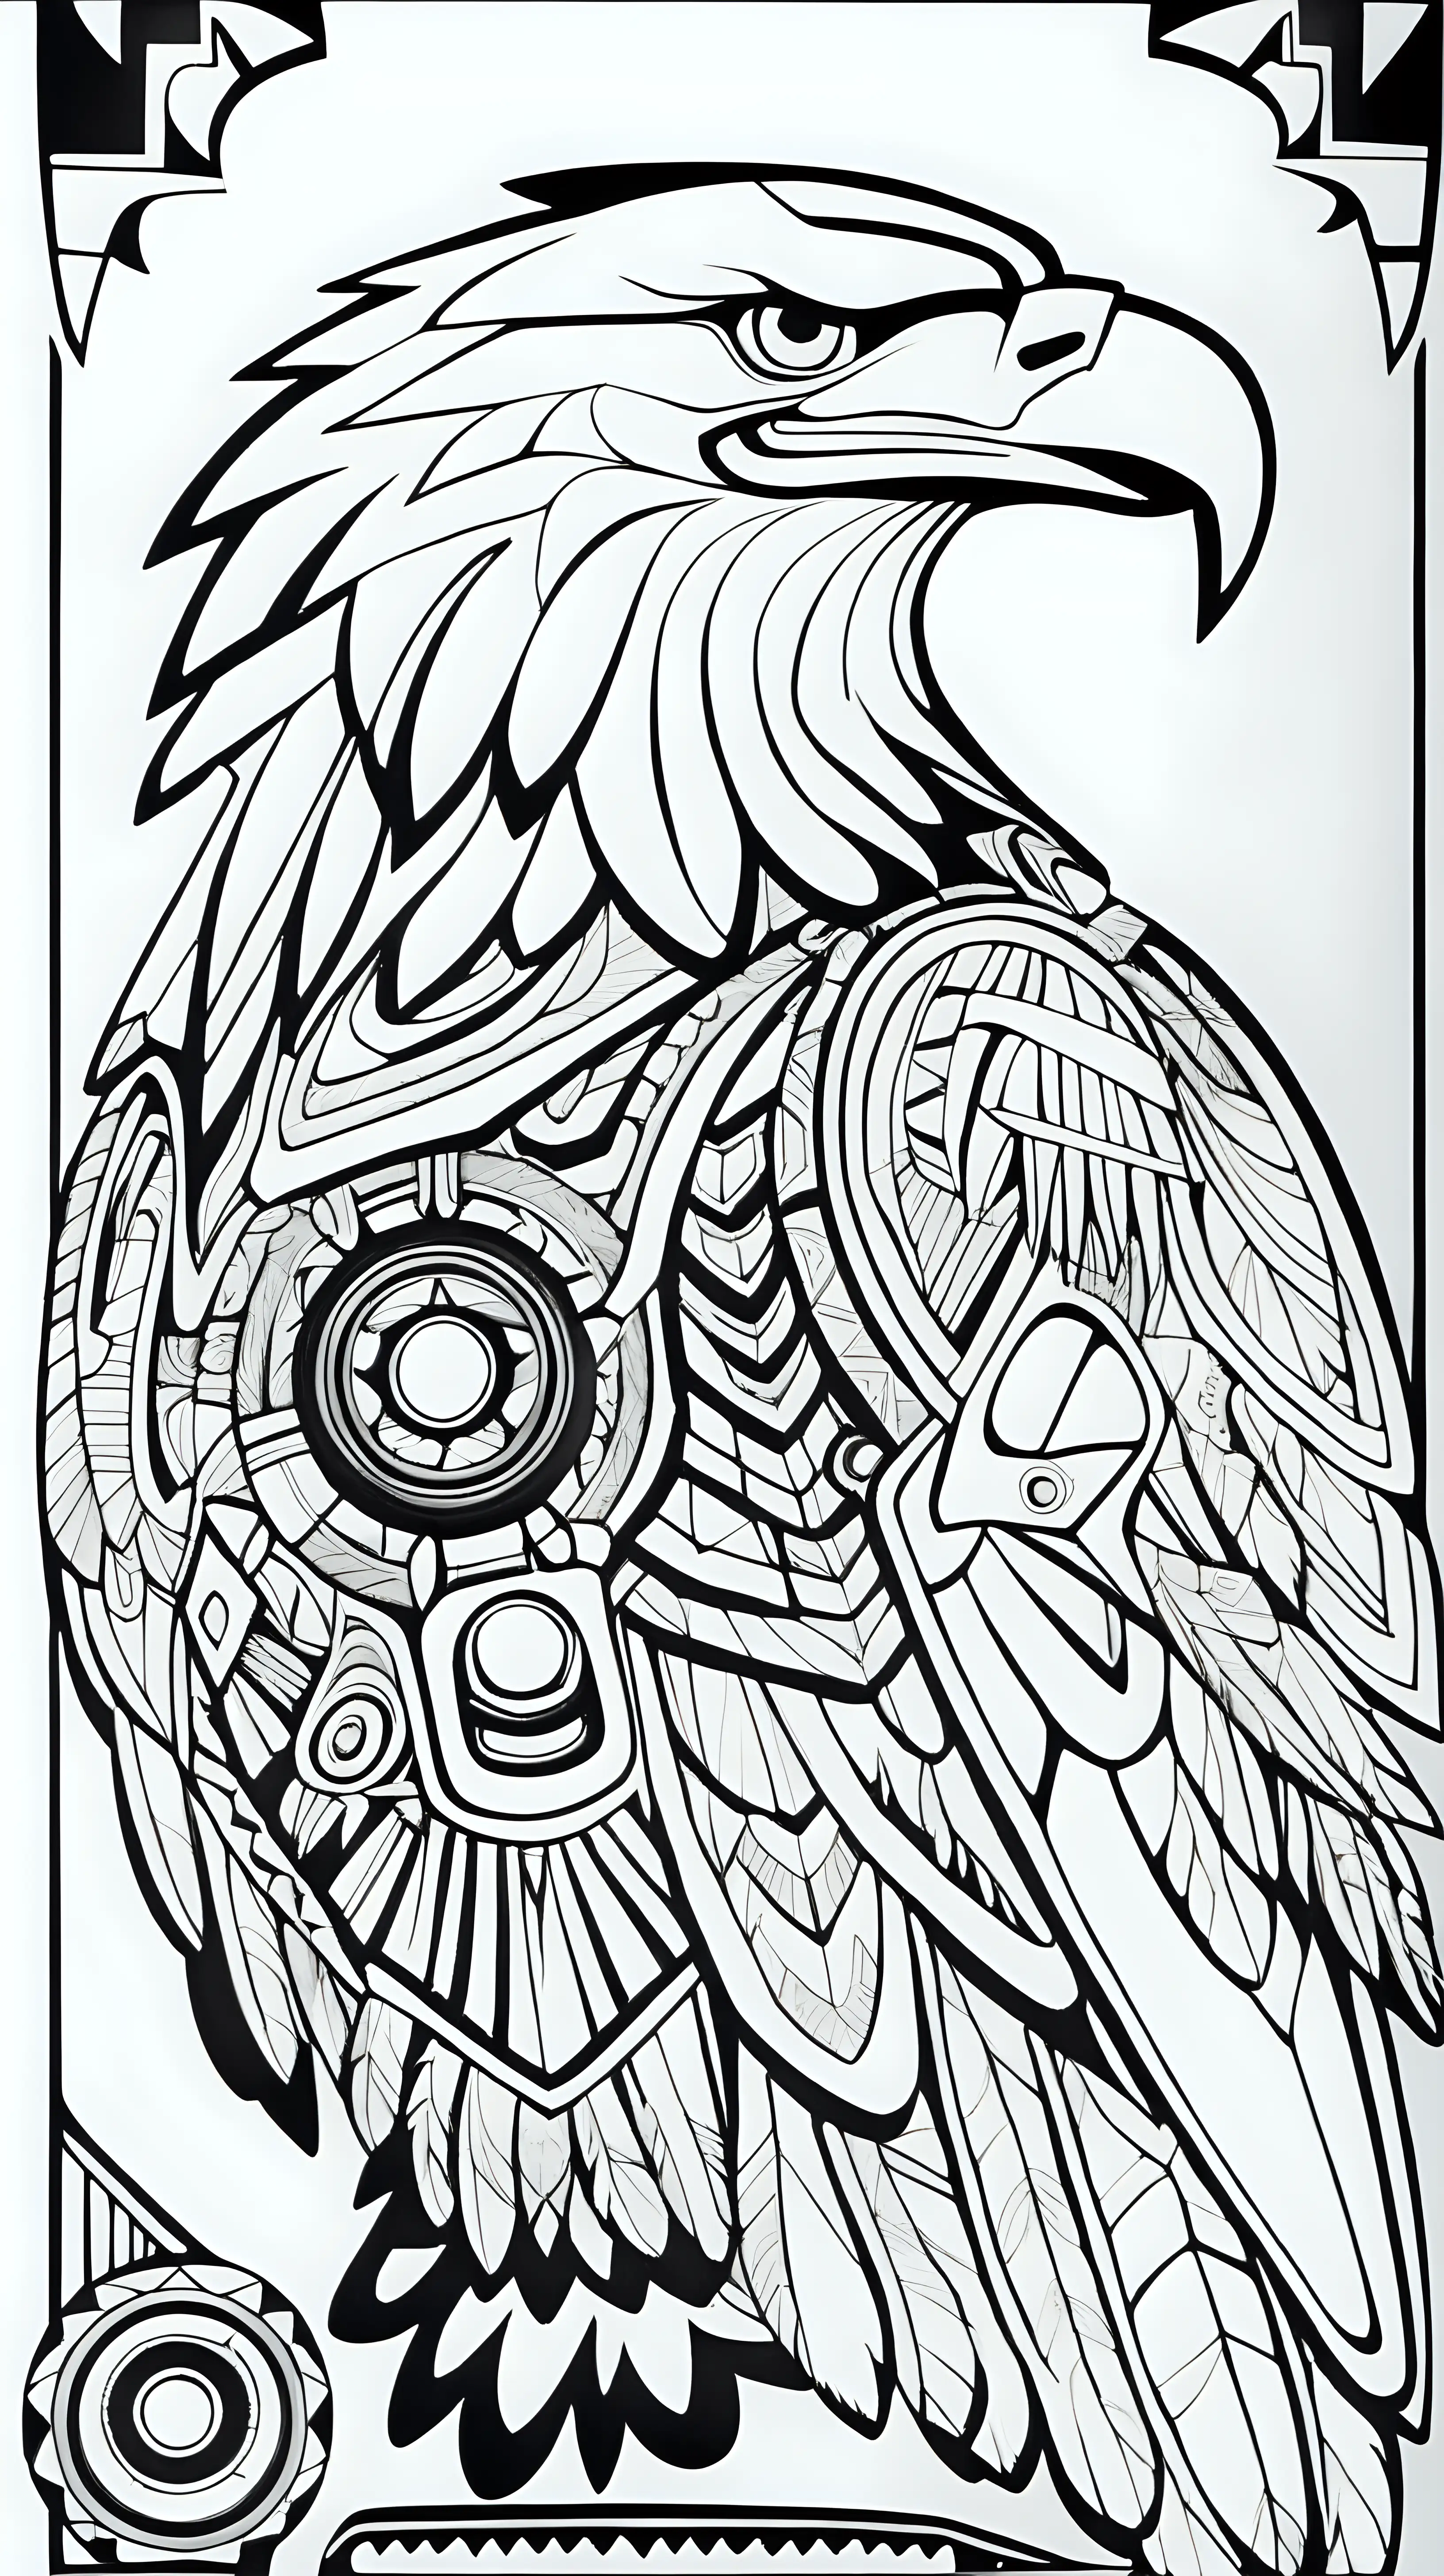 Eagle totem representing vision and freedom, inspired by the Navajo tribe, coloring book image, clean thick black lines